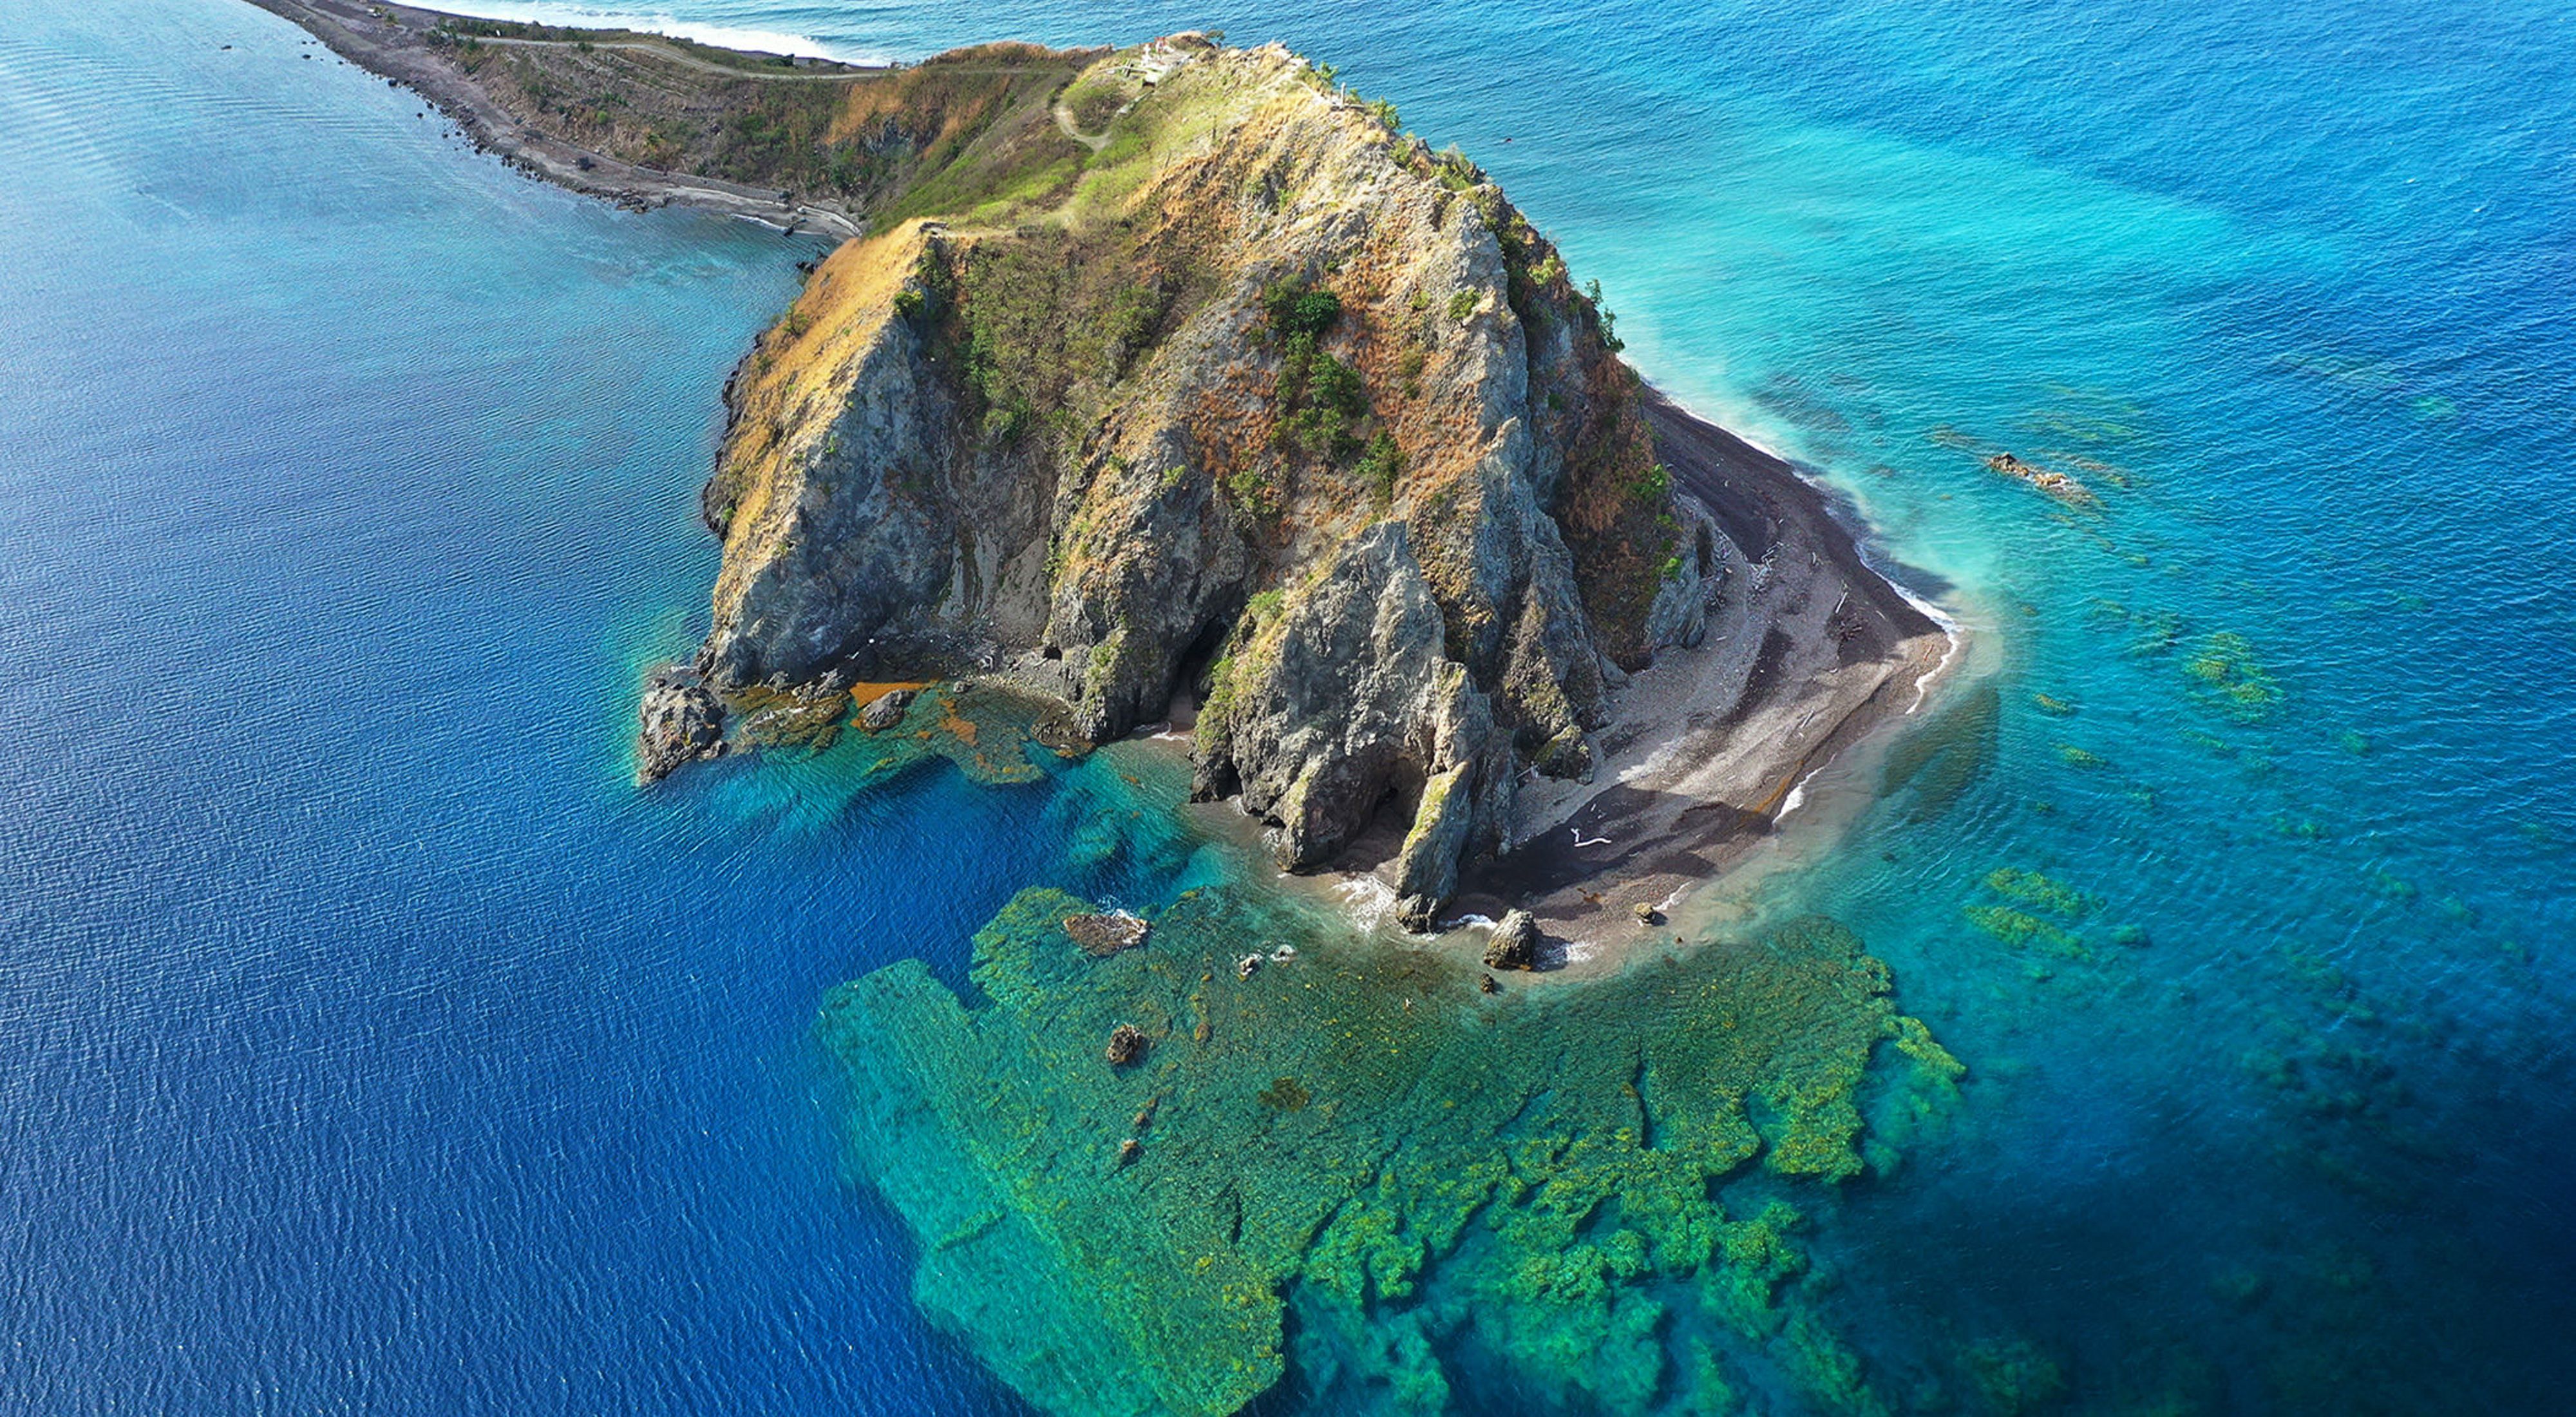 Aerial view of coastal cliffs and coral reefs below water's surface in Soufriere-Scott's Head Marine Reserve in Dominica.